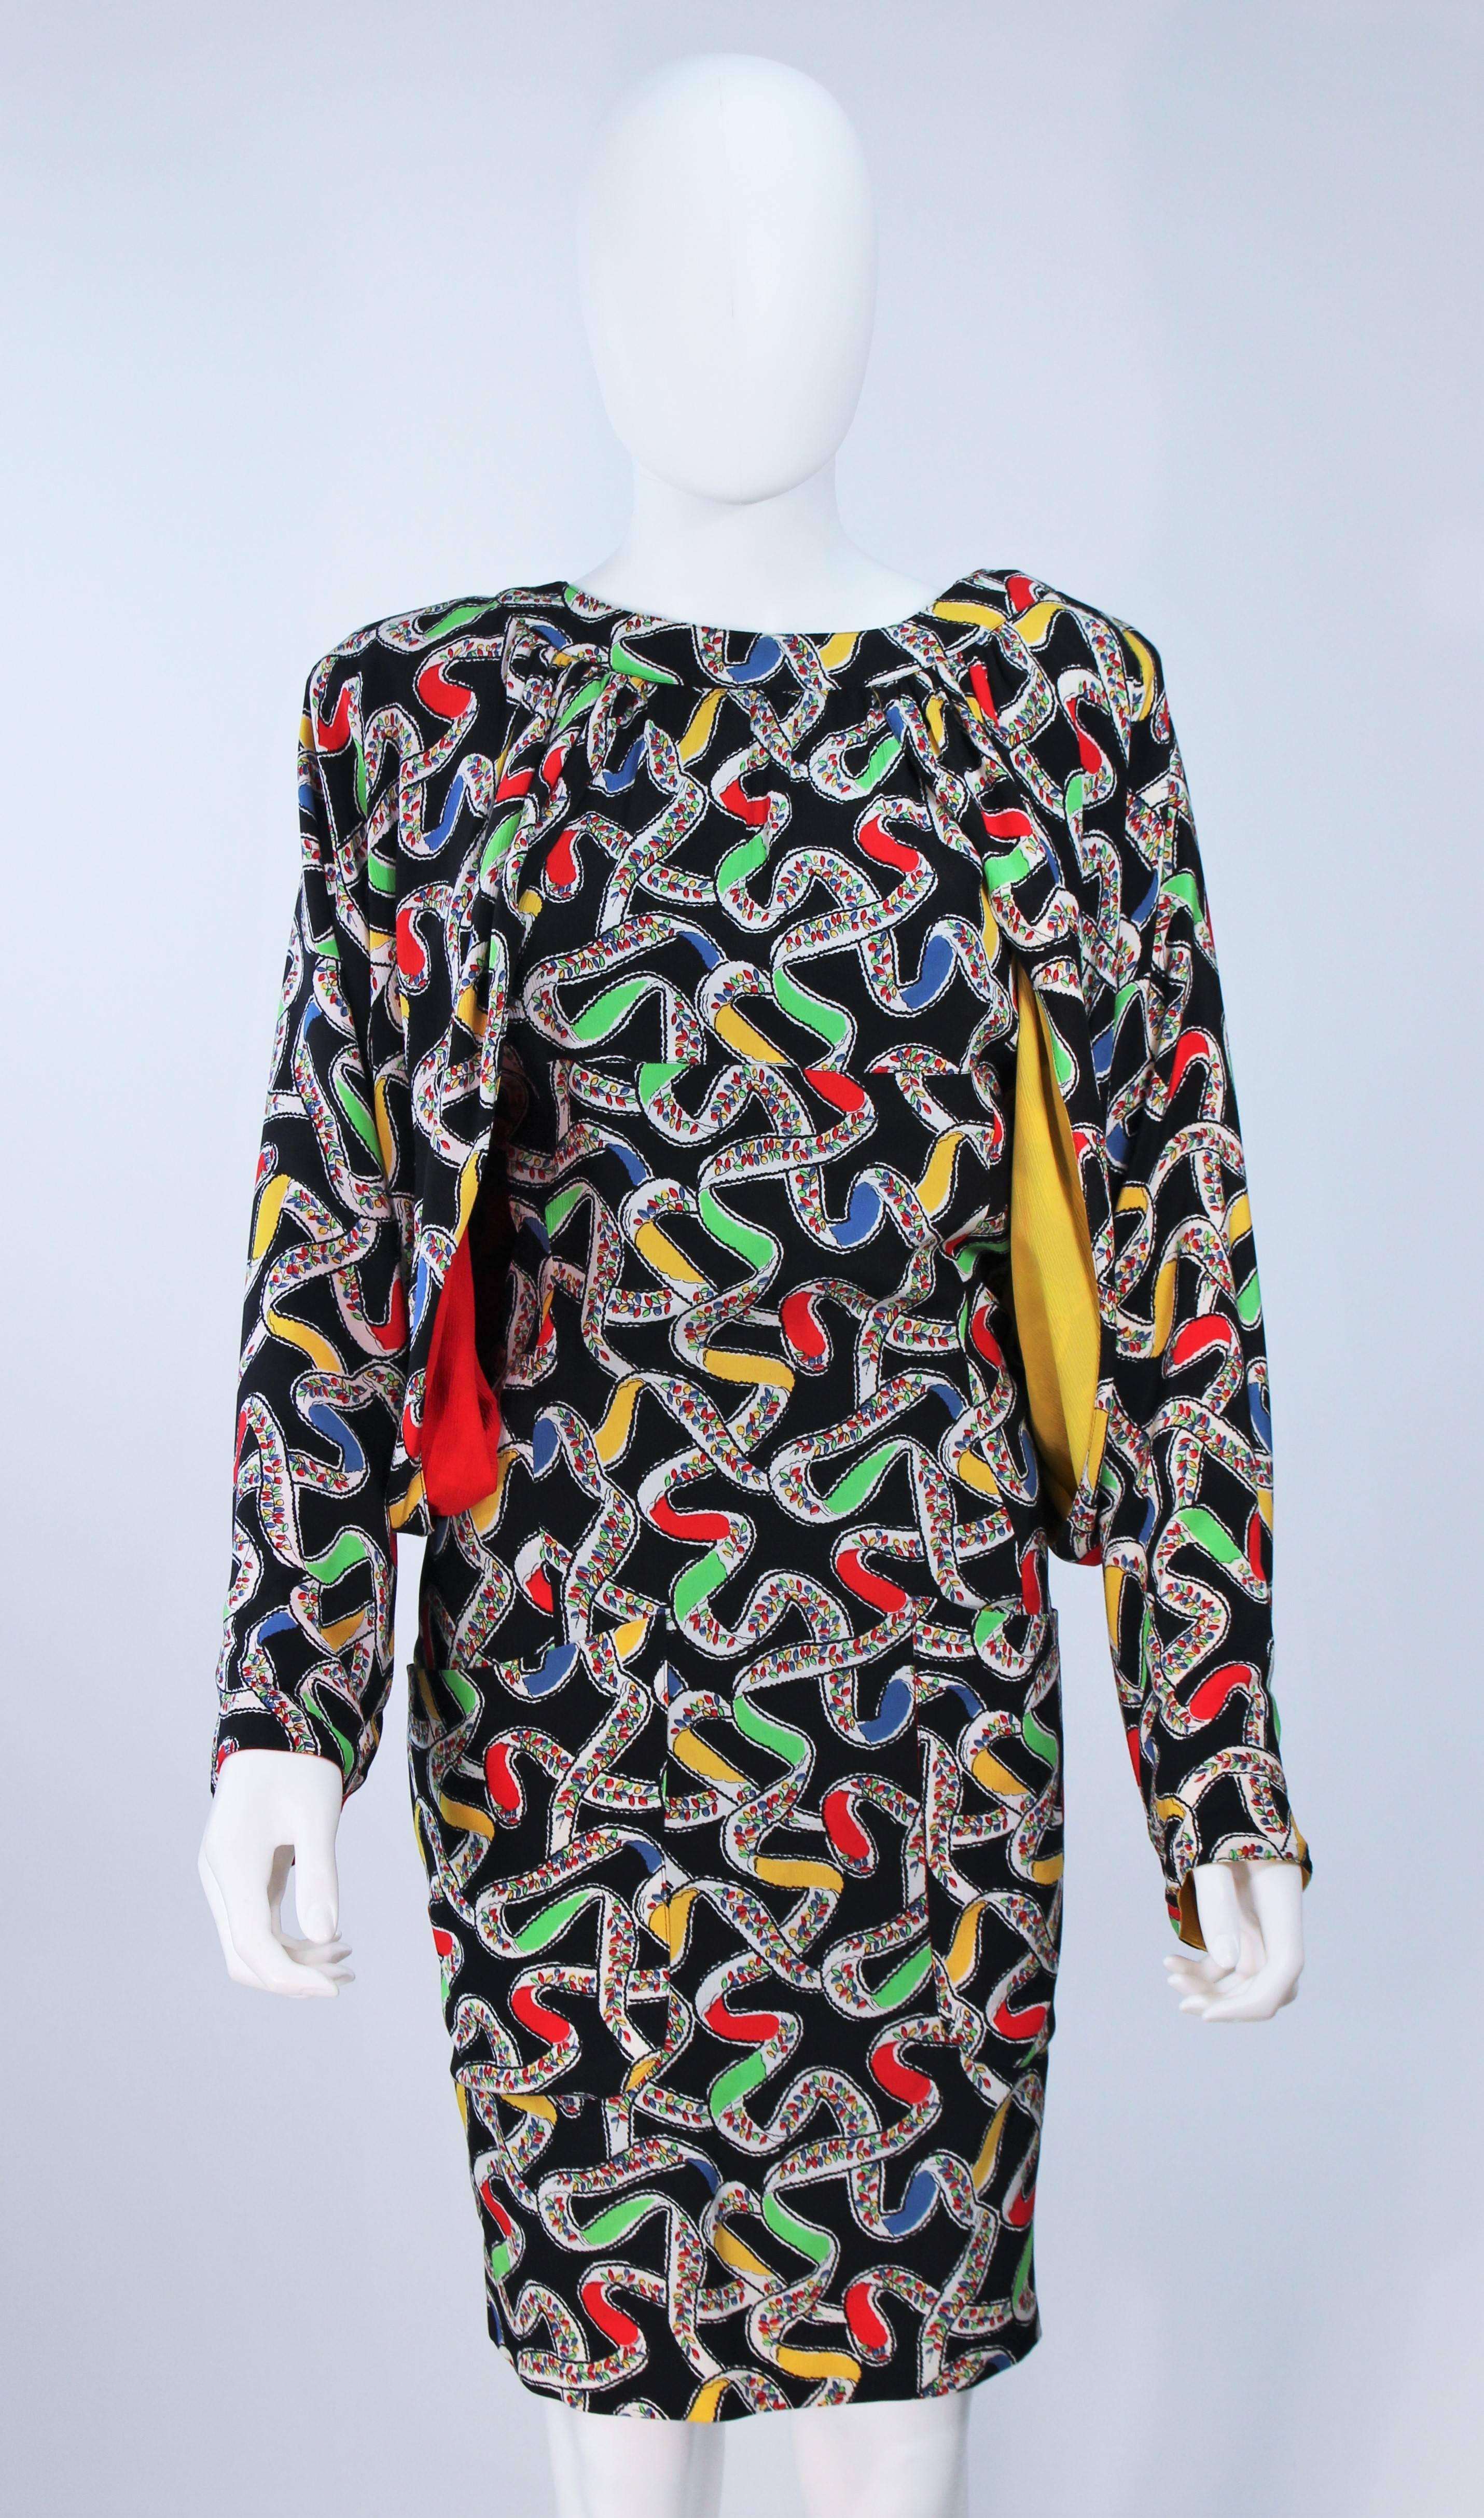 KARL LAGERFELD Attributed Draped Black Silk Abstract Dress Size 6-8 In Excellent Condition For Sale In Los Angeles, CA